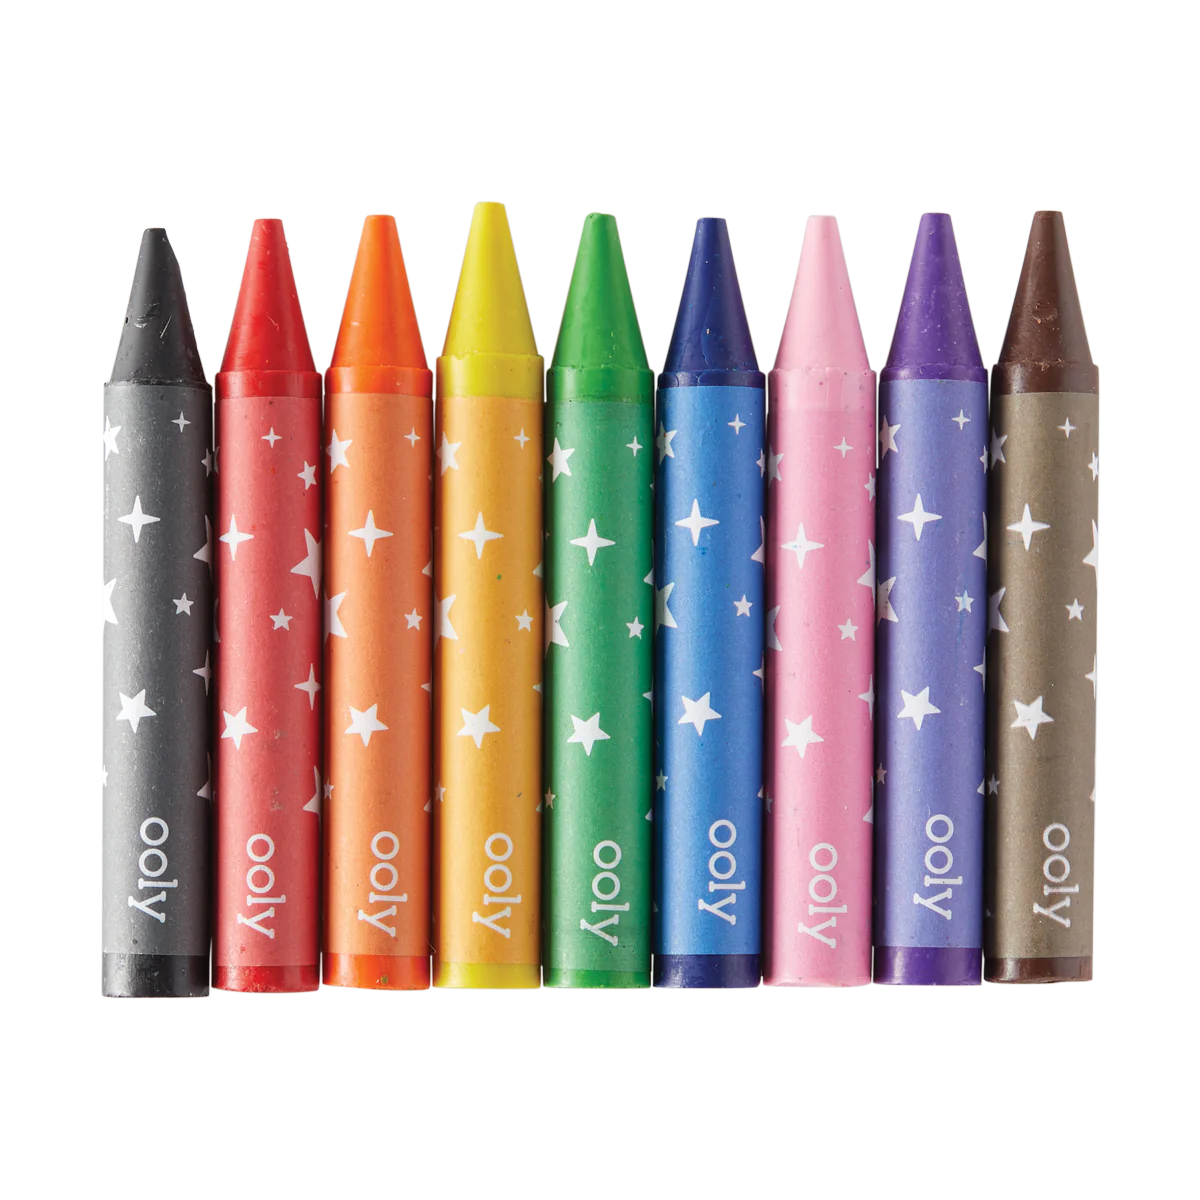 Ooly Carry Along Coloring Book Set - Pet Pals - Set of 9 Crayons-OOLY-Little Giant Kidz